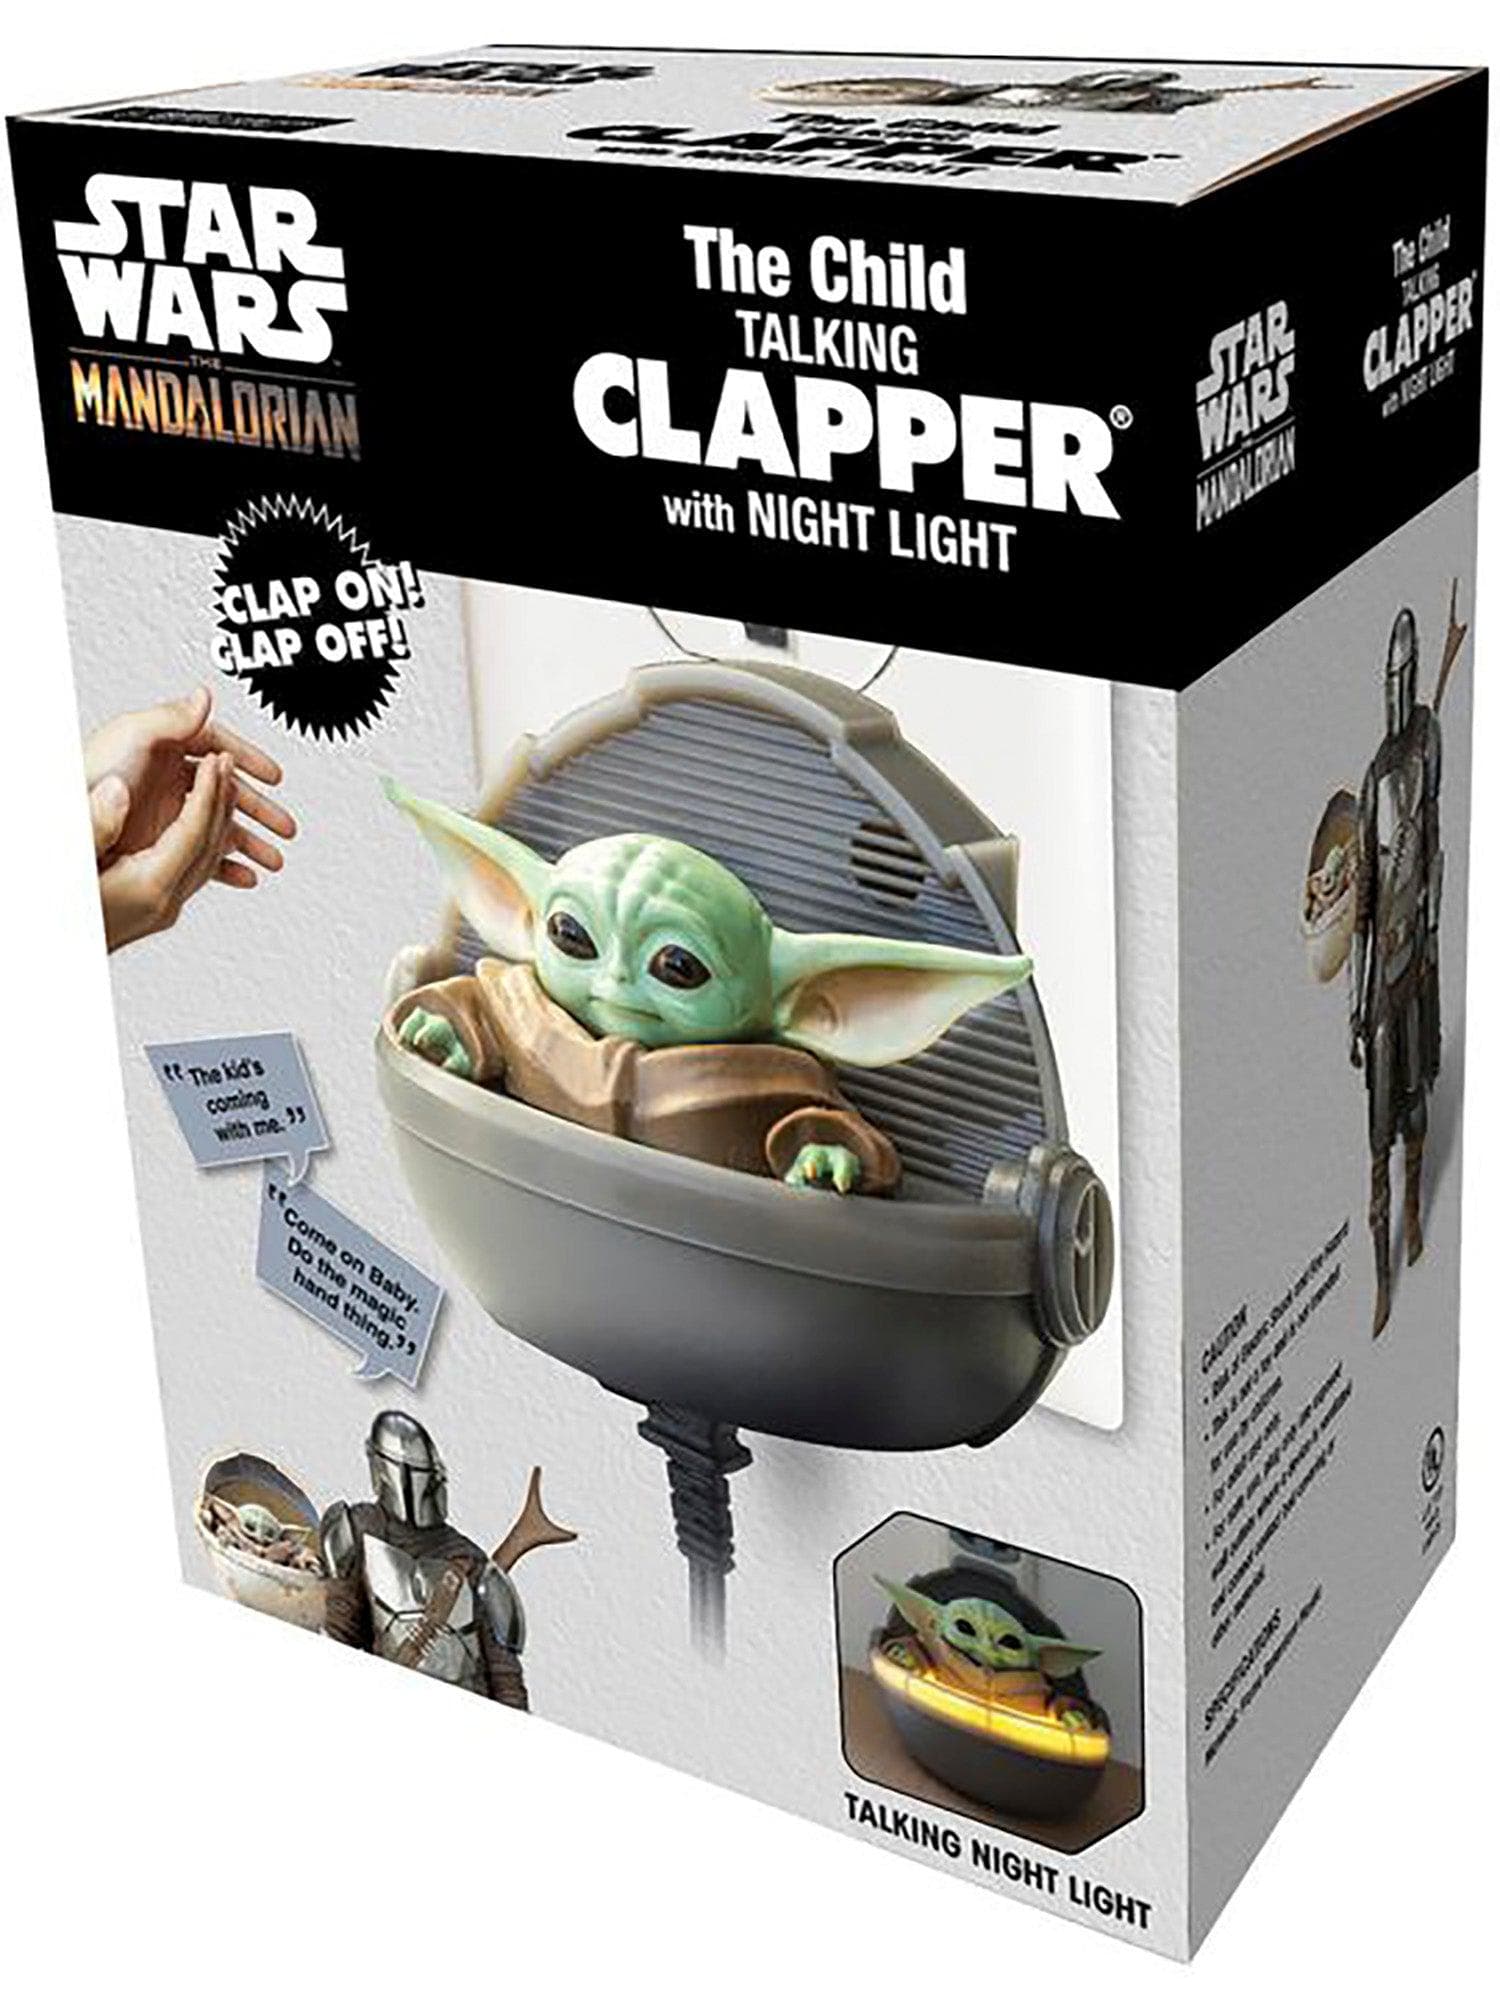 The Child Talking Clapper with Night Light - costumes.com